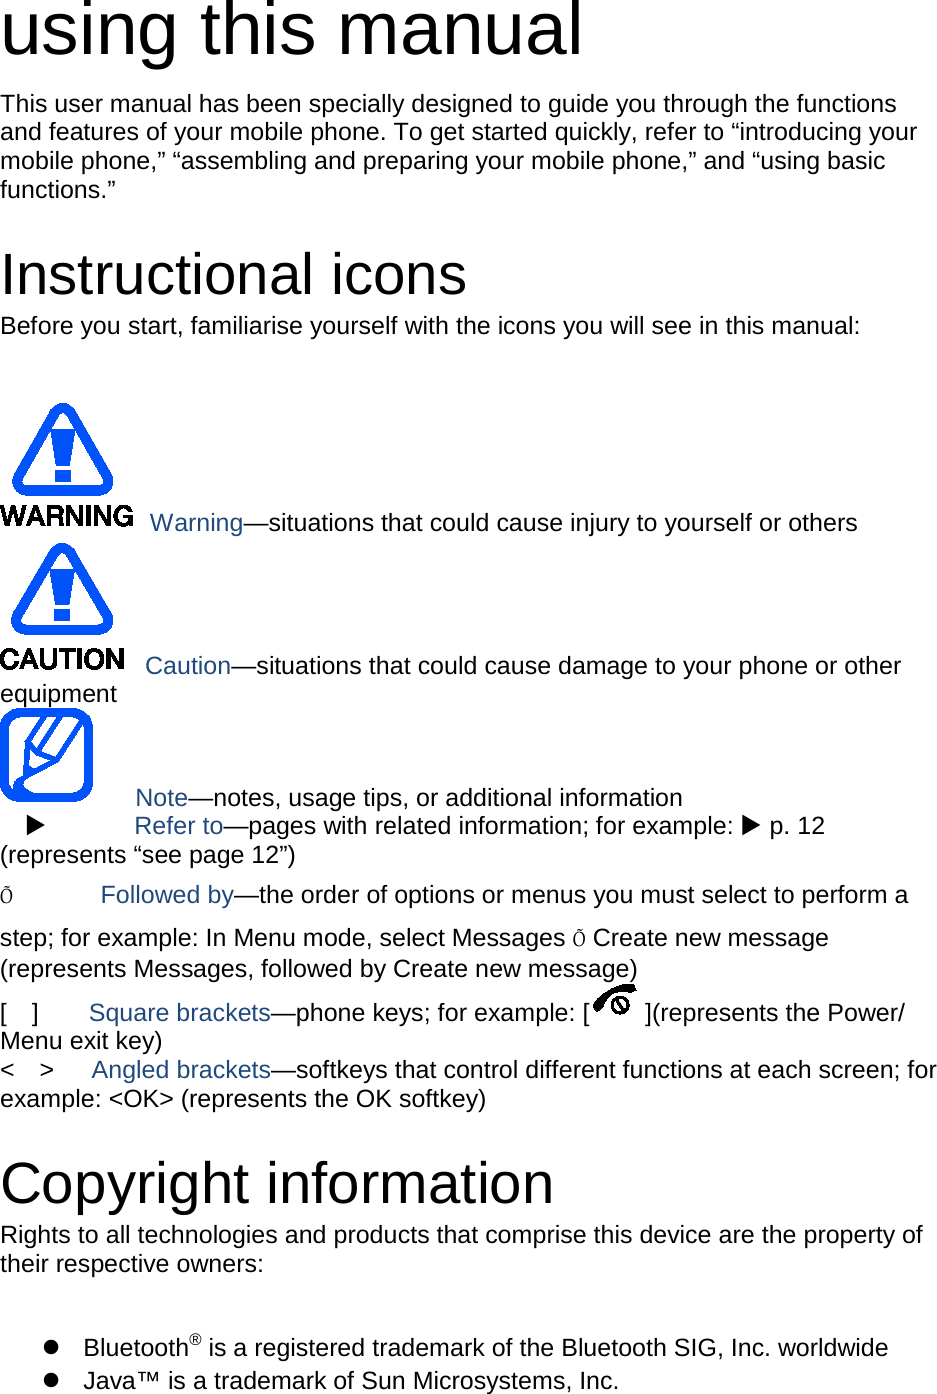 using this manual This user manual has been specially designed to guide you through the functions and features of your mobile phone. To get started quickly, refer to “introducing your mobile phone,” “assembling and preparing your mobile phone,” and “using basic functions.”  Instructional icons Before you start, familiarise yourself with the icons you will see in this manual:     Warning—situations that could cause injury to yourself or others  Caution—situations that could cause damage to your phone or other equipment    Note—notes, usage tips, or additional information          Refer to—pages with related information; for example:  p. 12 (represents “see page 12”) Õ       Followed by—the order of options or menus you must select to perform a step; for example: In Menu mode, select Messages Õ Create new message (represents Messages, followed by Create new message) [  ]    Square brackets—phone keys; for example: [ ](represents the Power/ Menu exit key) &lt;  &gt;   Angled brackets—softkeys that control different functions at each screen; for example: &lt;OK&gt; (represents the OK softkey)  Copyright information Rights to all technologies and products that comprise this device are the property of their respective owners:   Bluetooth® is a registered trademark of the Bluetooth SIG, Inc. worldwide  Java™ is a trademark of Sun Microsystems, Inc. 